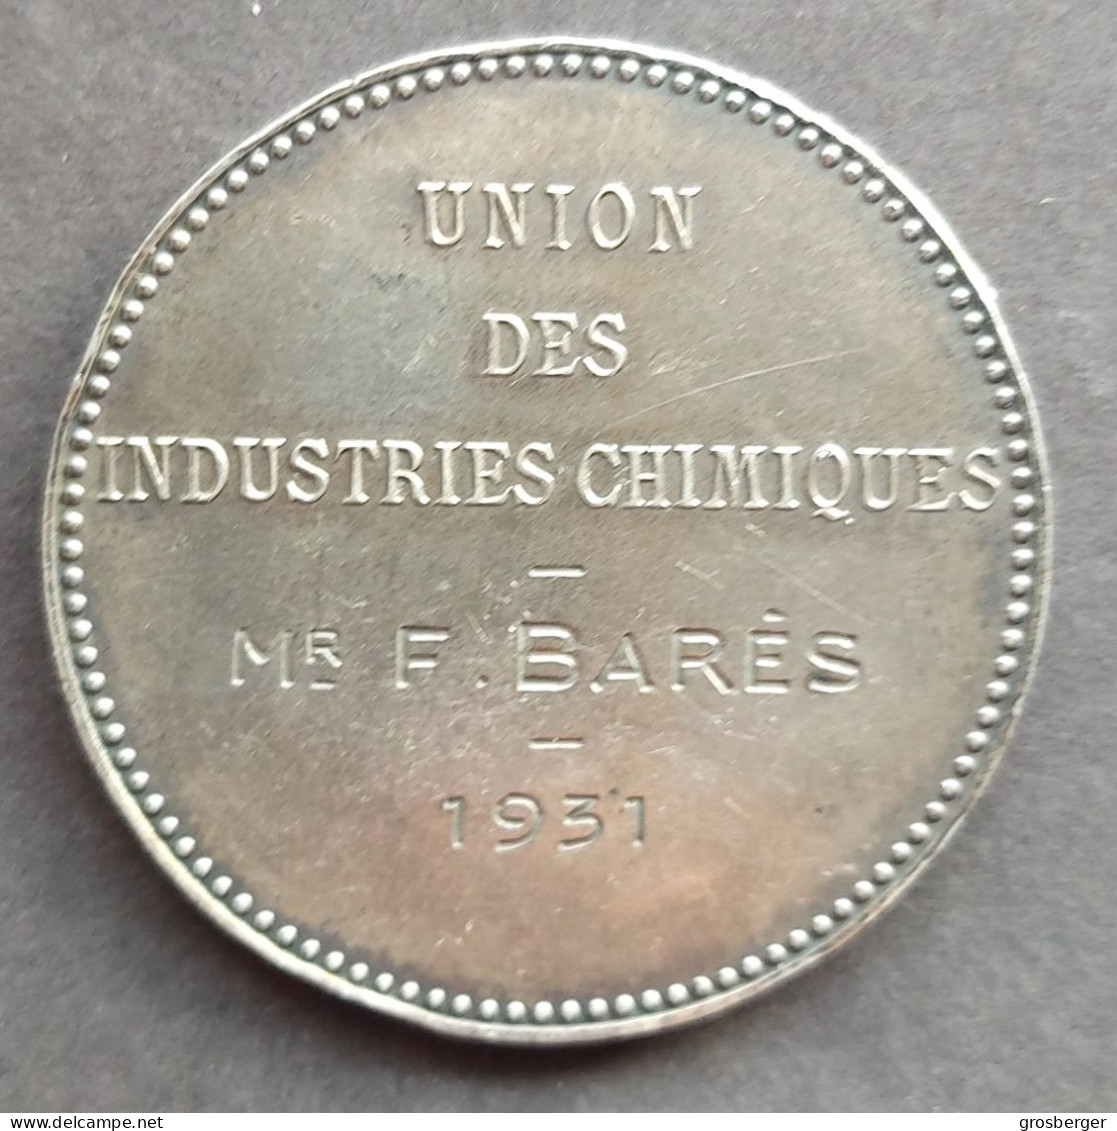 France Silver - Union Des Industries Chimiques 1931 - Industrial Awards Coins - Collections